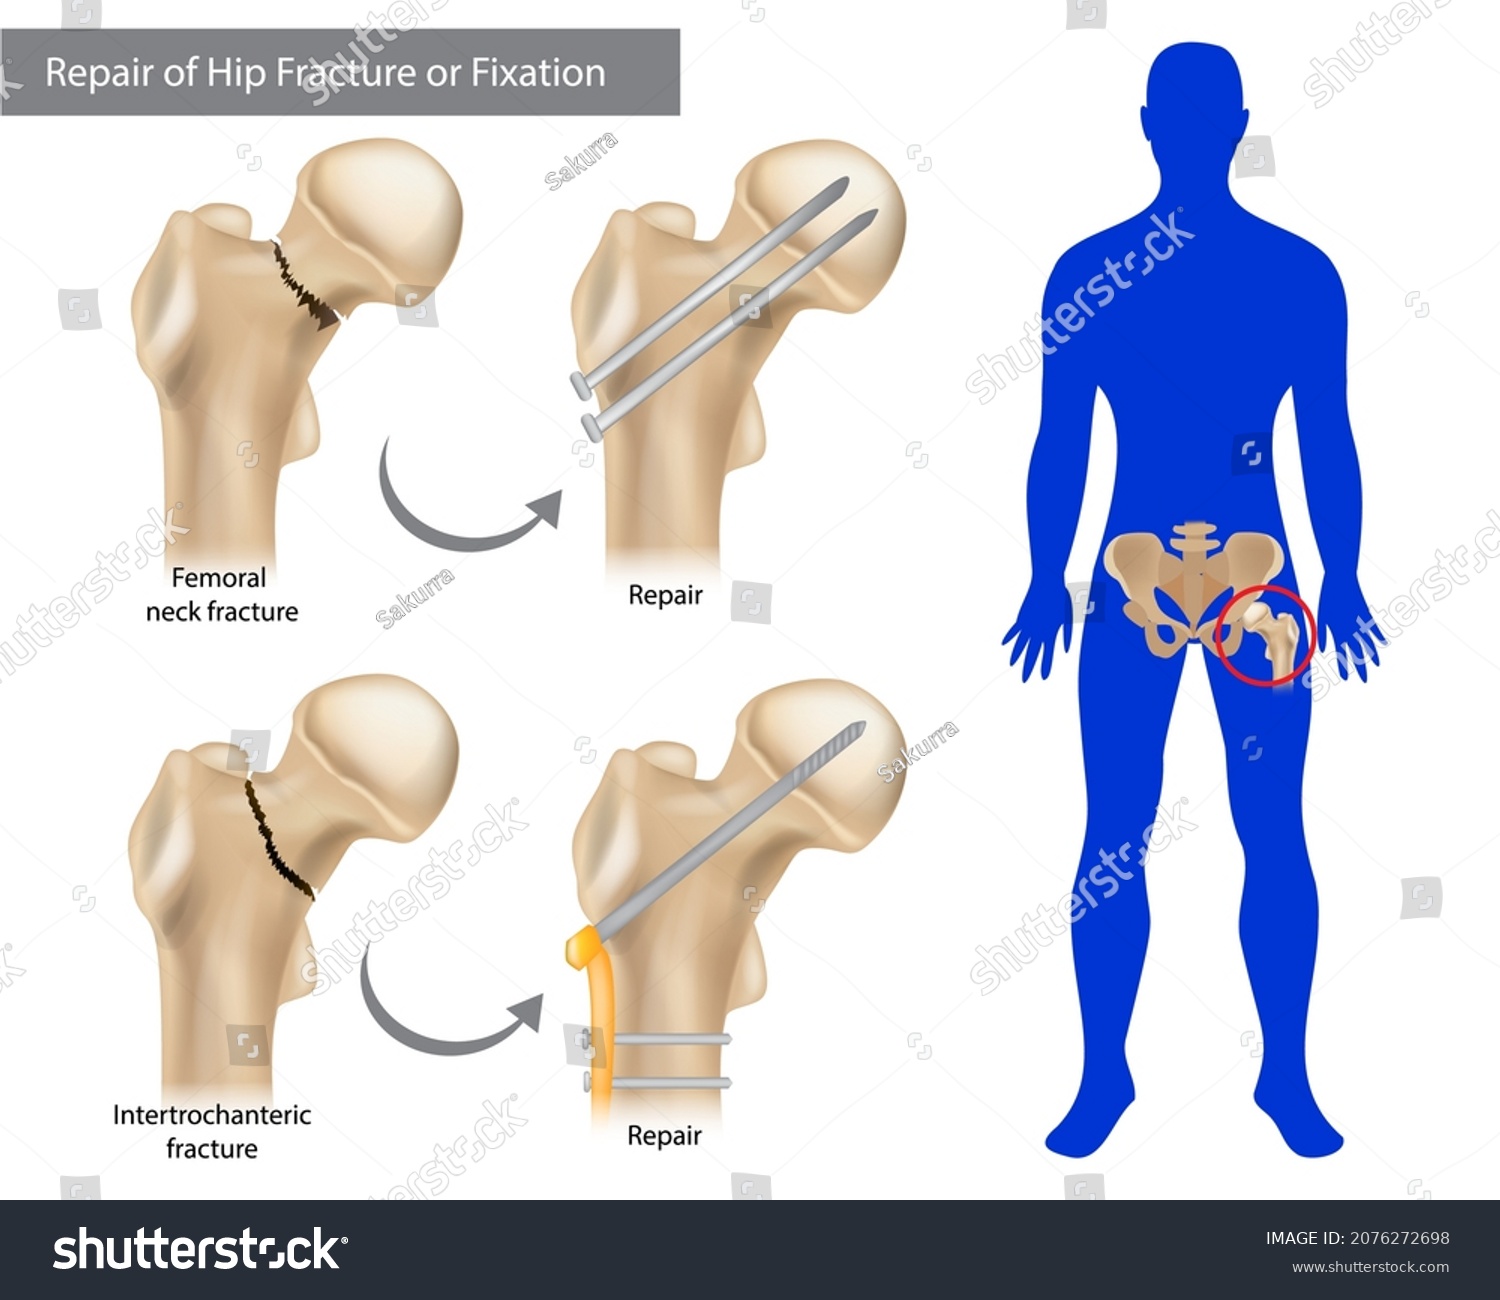 SVG of Repair of Hip Fracture or Fixation. Intertrochanteric fracture or Femoral neck fracture. Broken Hip svg